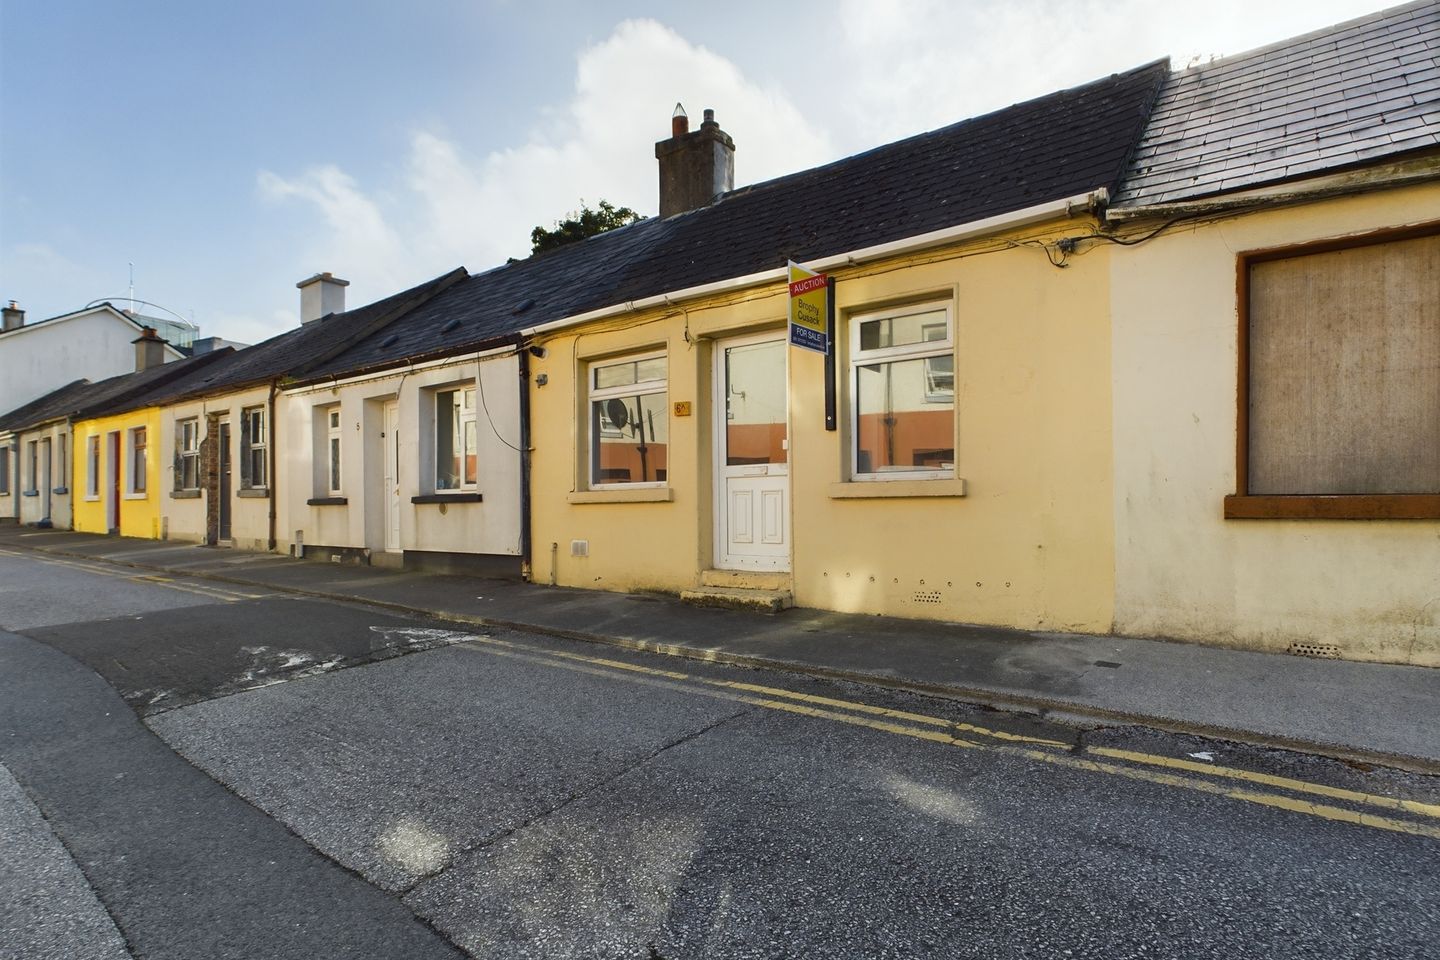 6 Summerhill Terrace, Summer Hill, Waterford City, Co. Waterford, X91VH3V